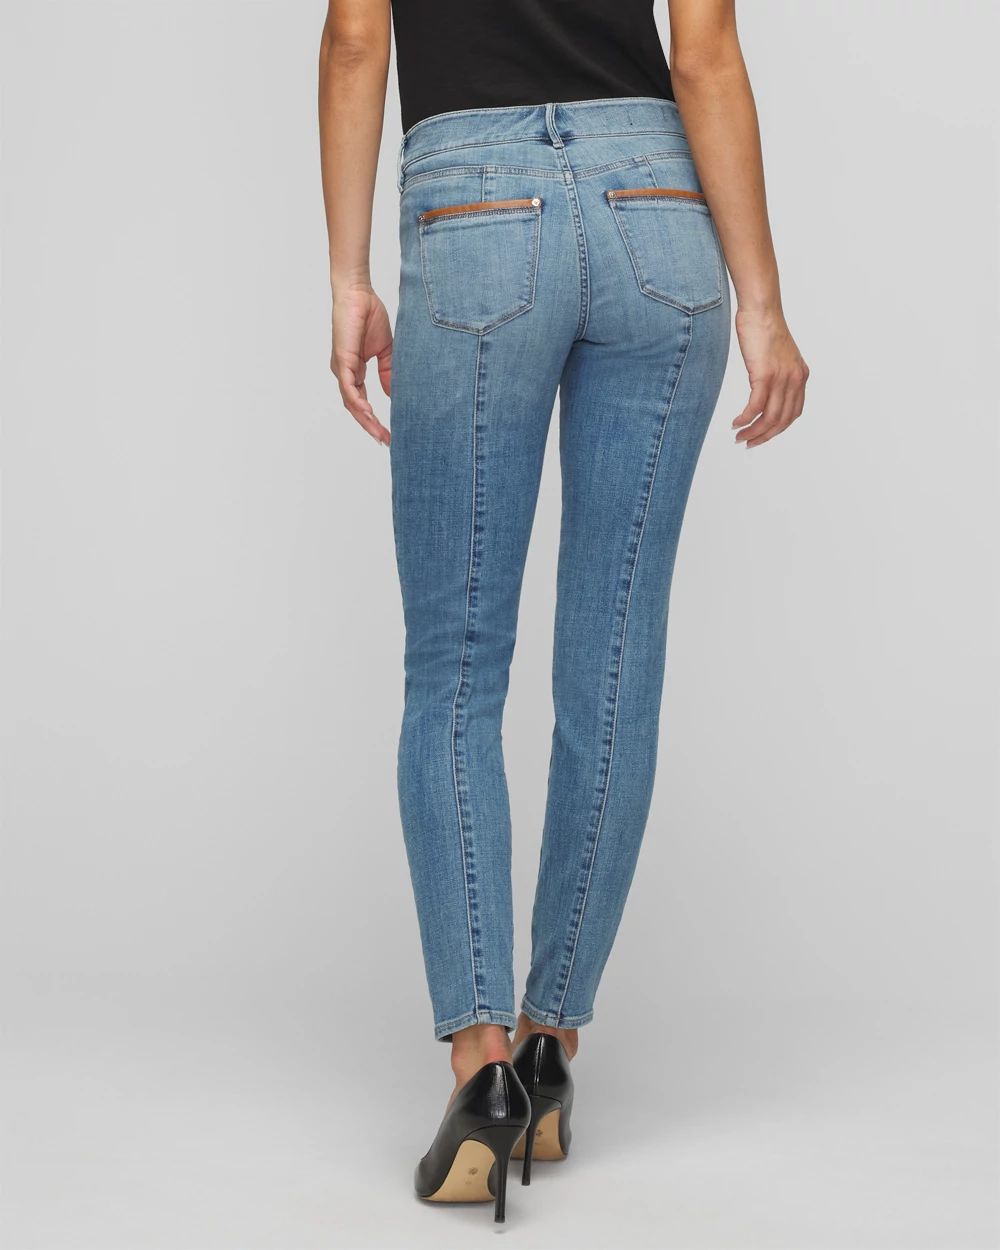 Mid-Rise Everyday Soft Pocket Skinny Ankle Jeans click to view larger image.